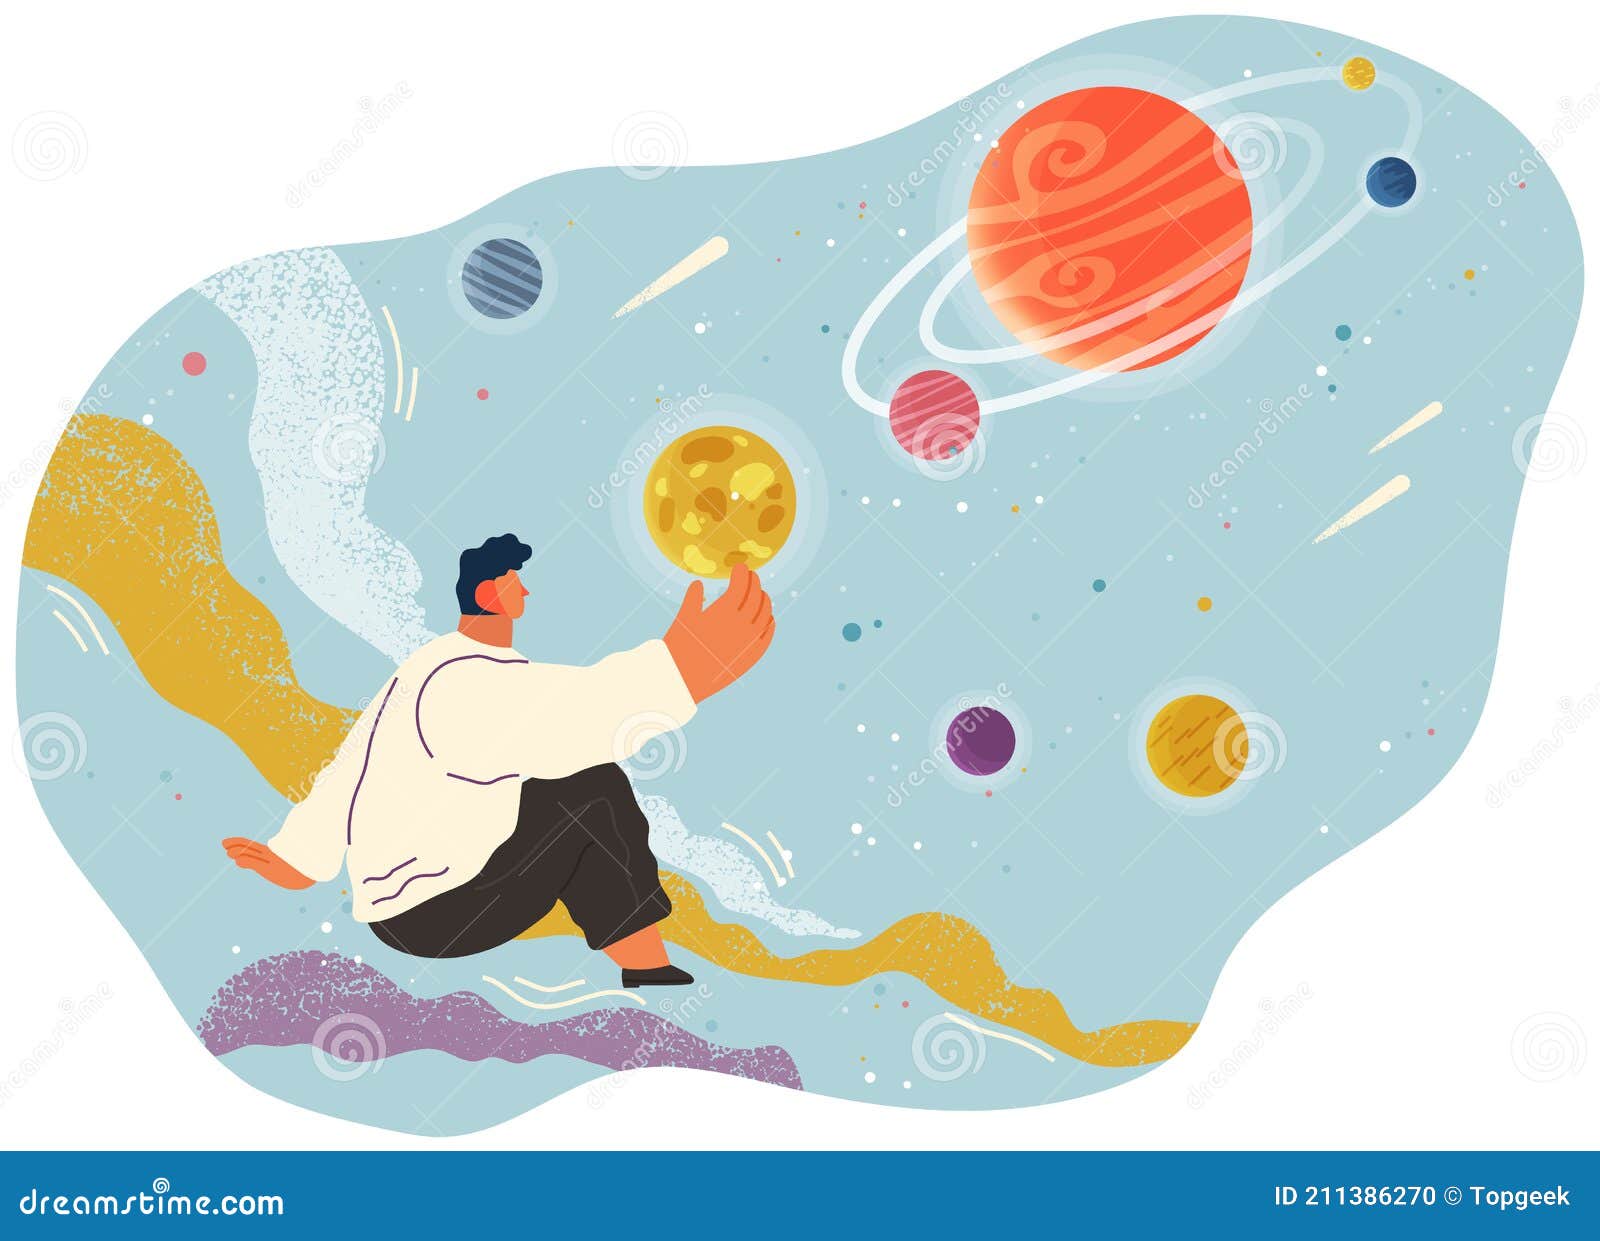 A Man Sitting in Fantastic Space Holding Planet with Dream Universe Cartoon  Cosmic Abstract Scene Stock Vector - Illustration of character, stars:  211386270